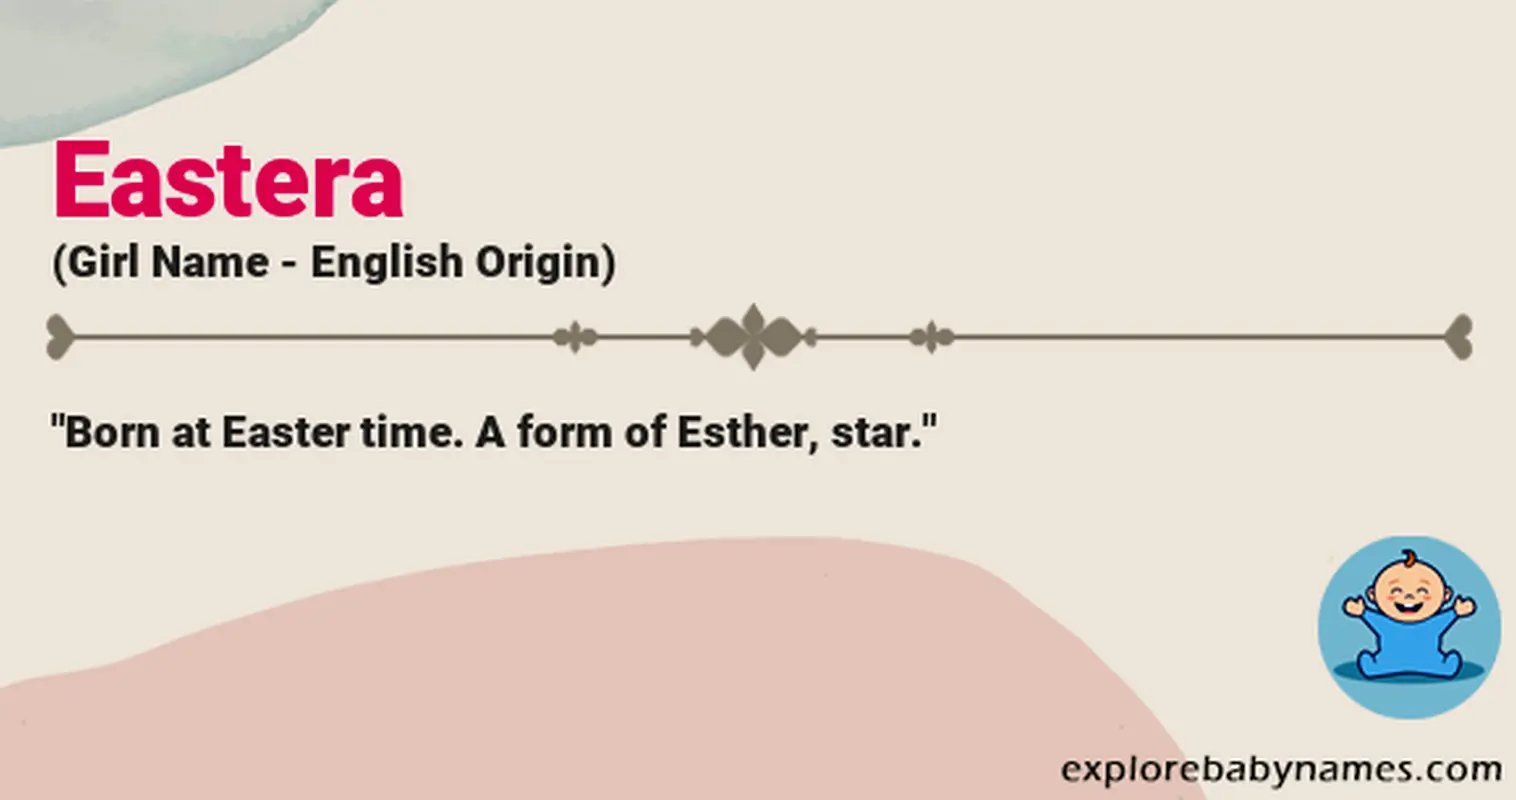 Meaning of Eastera